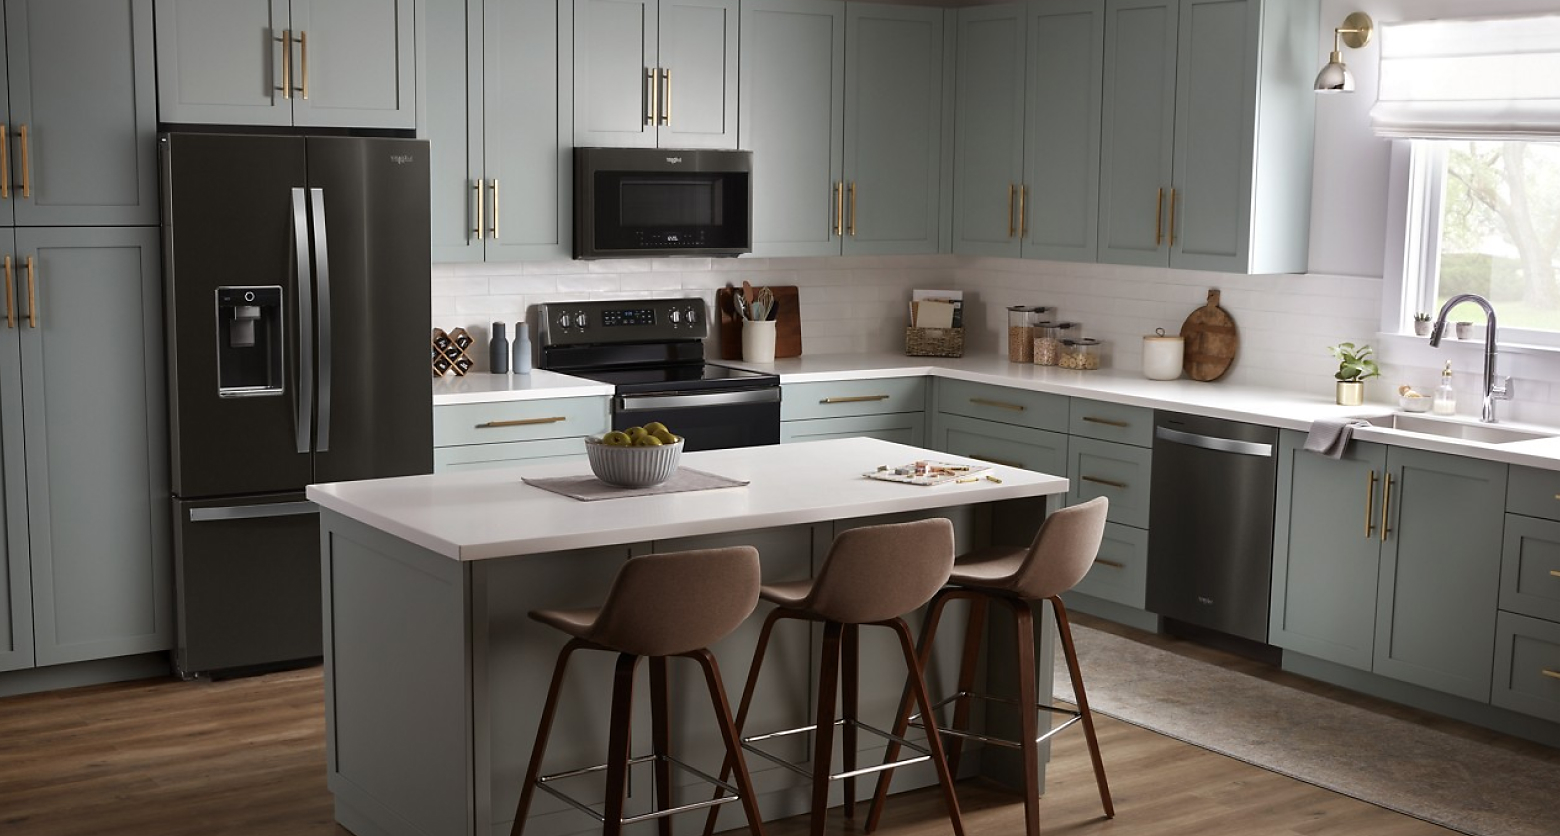 Gray kitchen featuring Whirlpool®  appliances in black stainless steel 